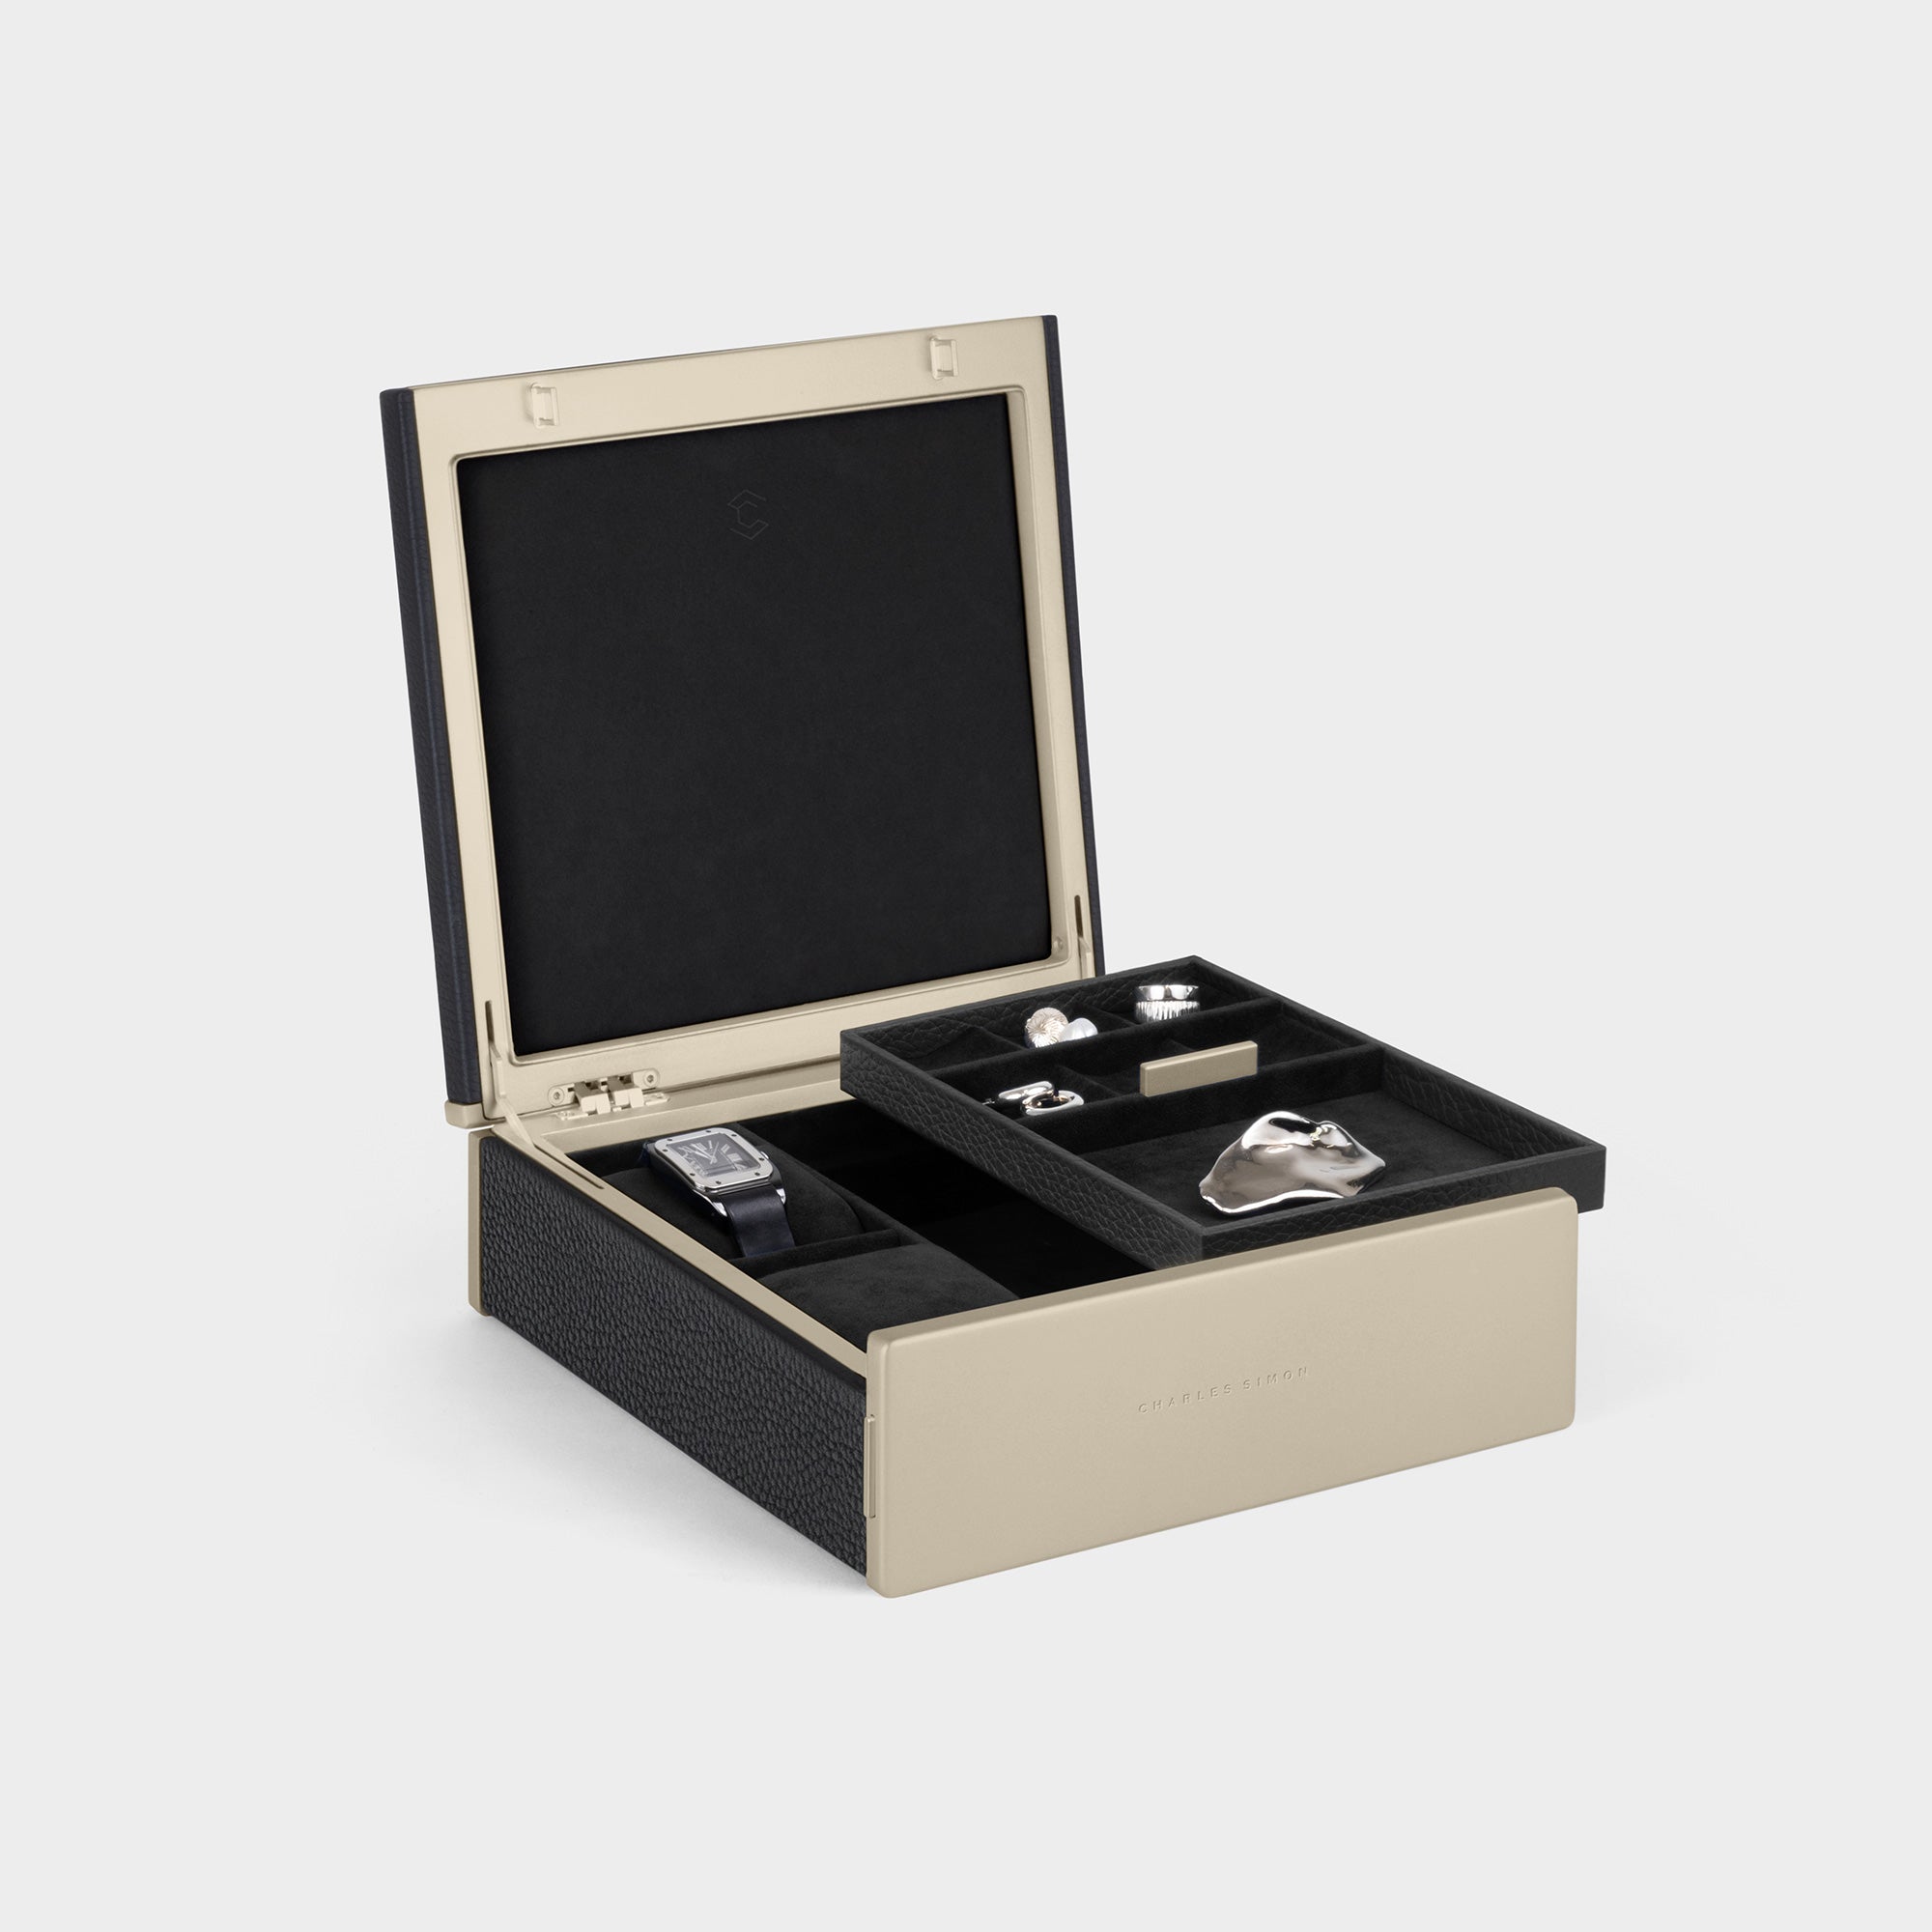 Open Taylor 2 Watch and Jewelry box with gold framing and black leather exterior. The handmade Taylor 2 Watch and Jewelry box features convenient compartments to organize and store your jewelry and watch collection in style. 